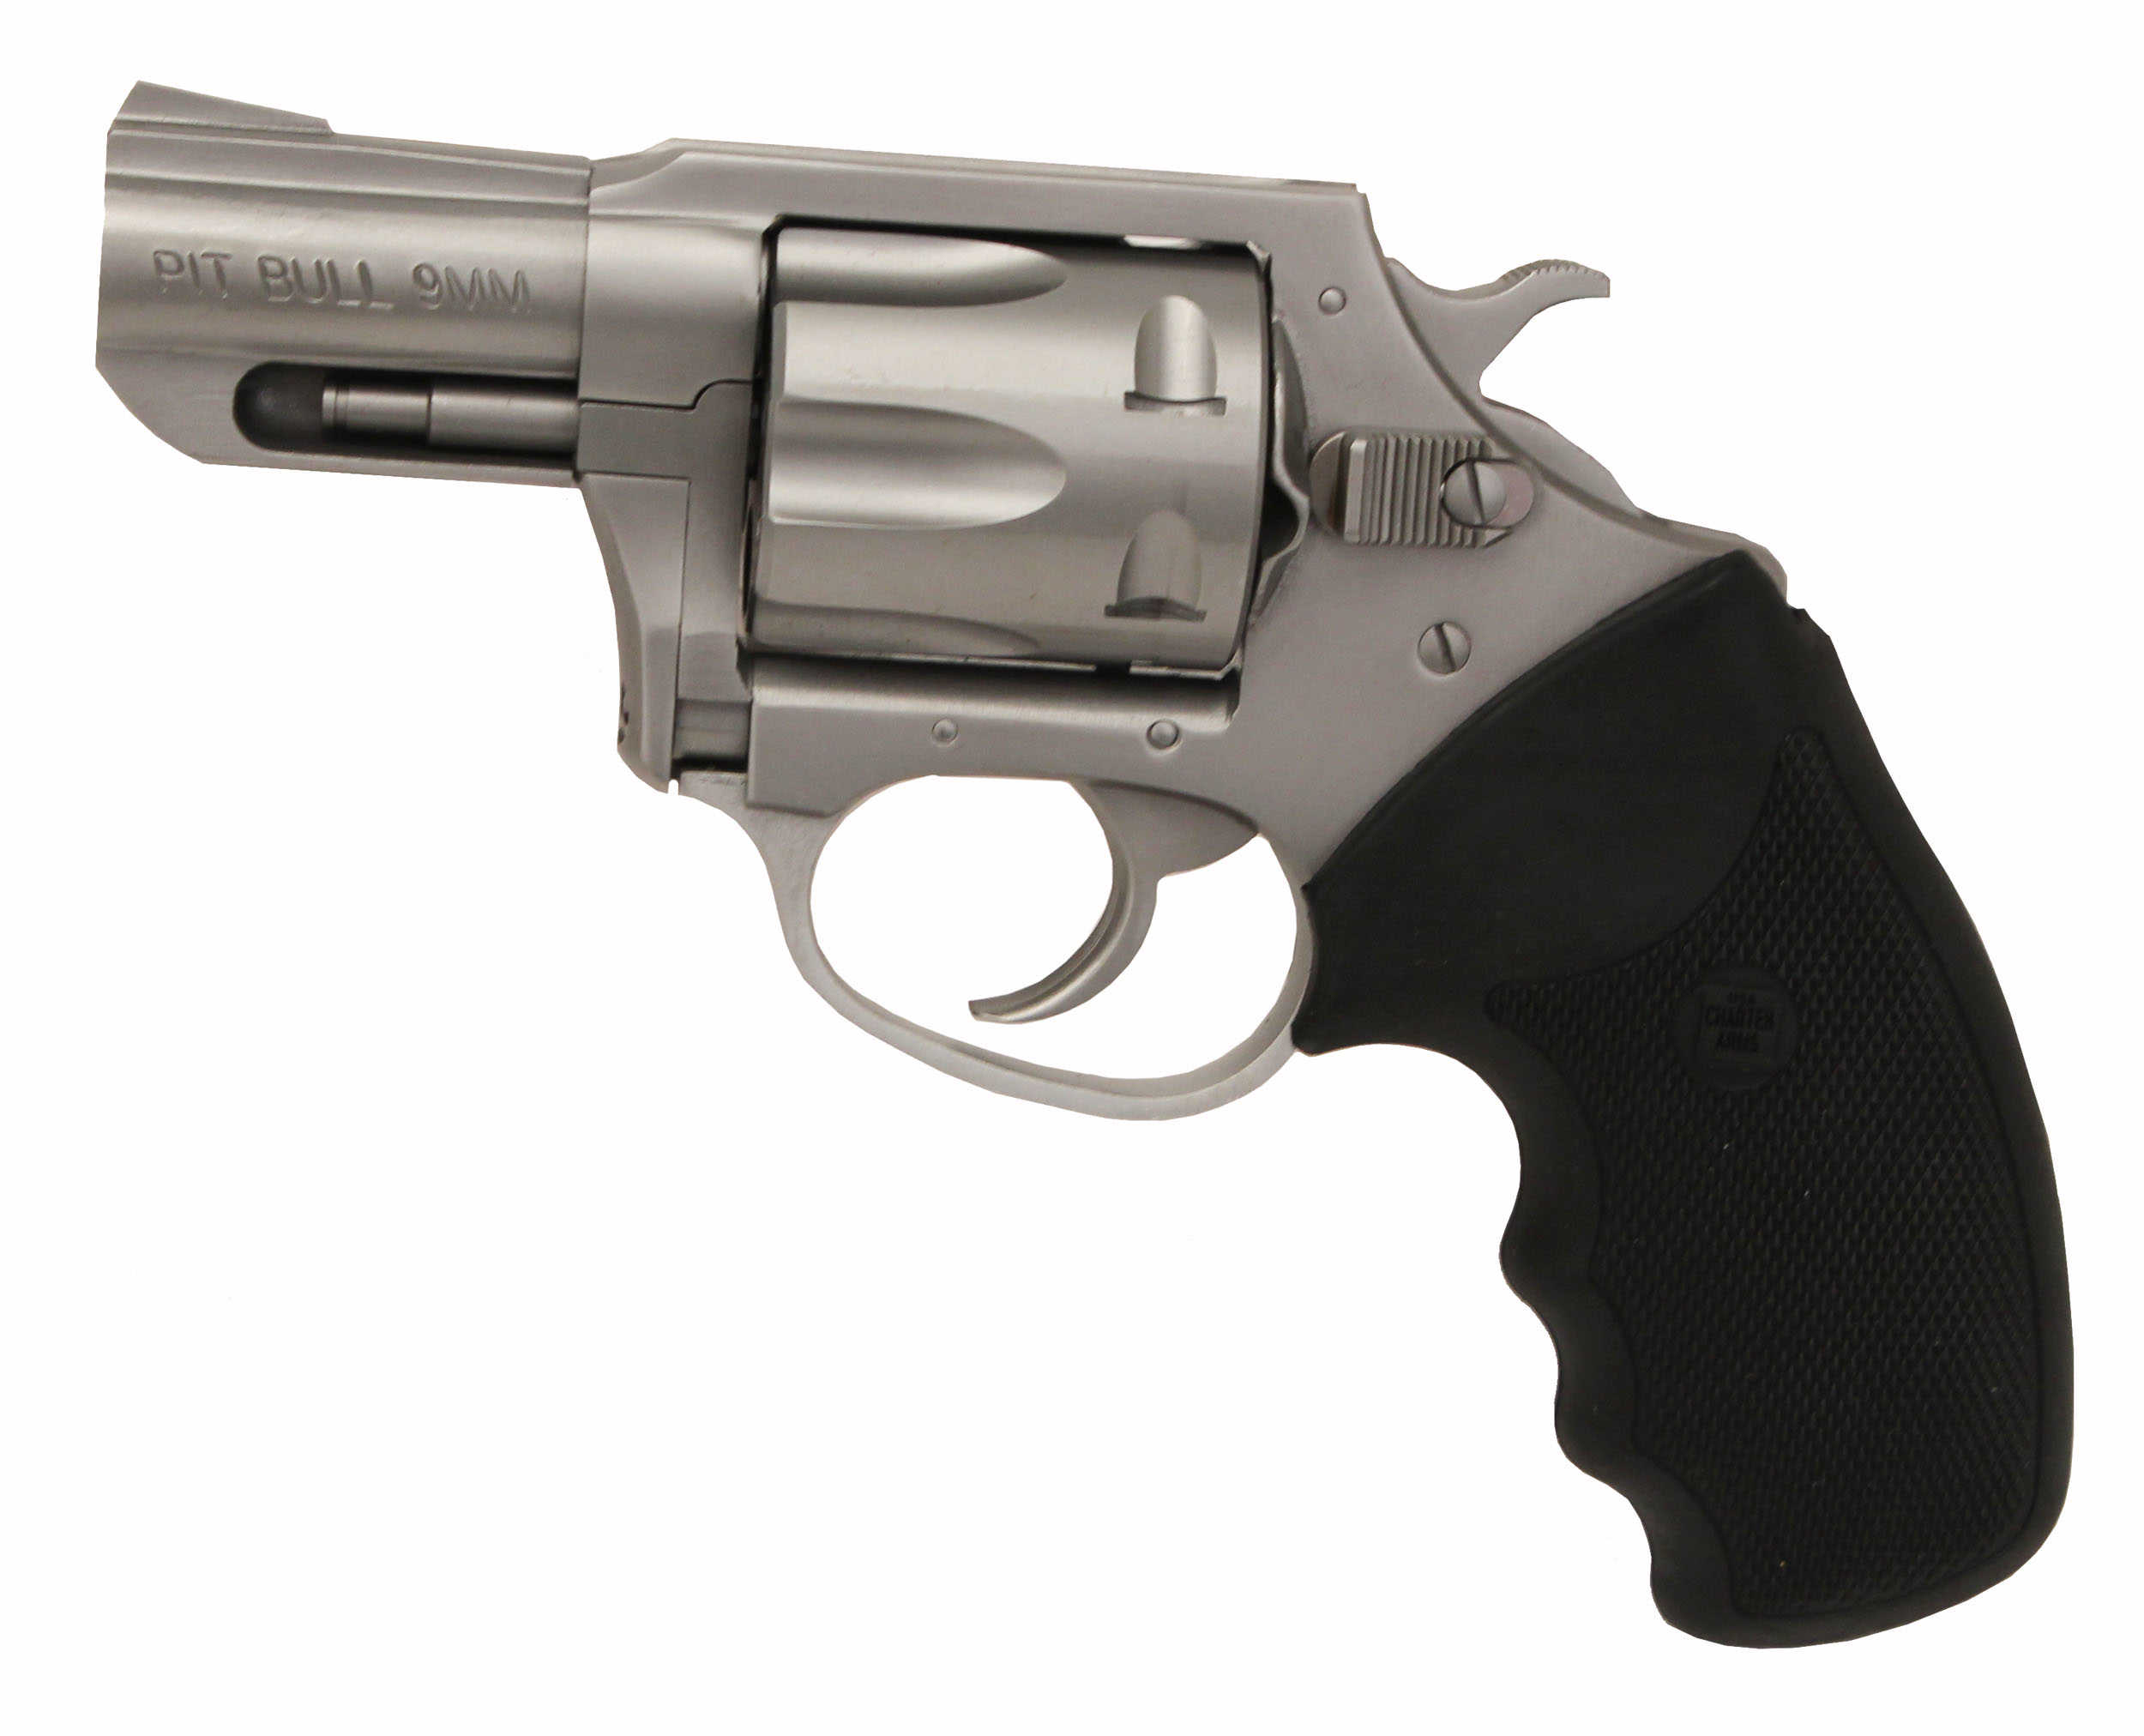 Revolver Charter Arms Pitbull 9mm Luger 2" 5 Round Rubber Grip